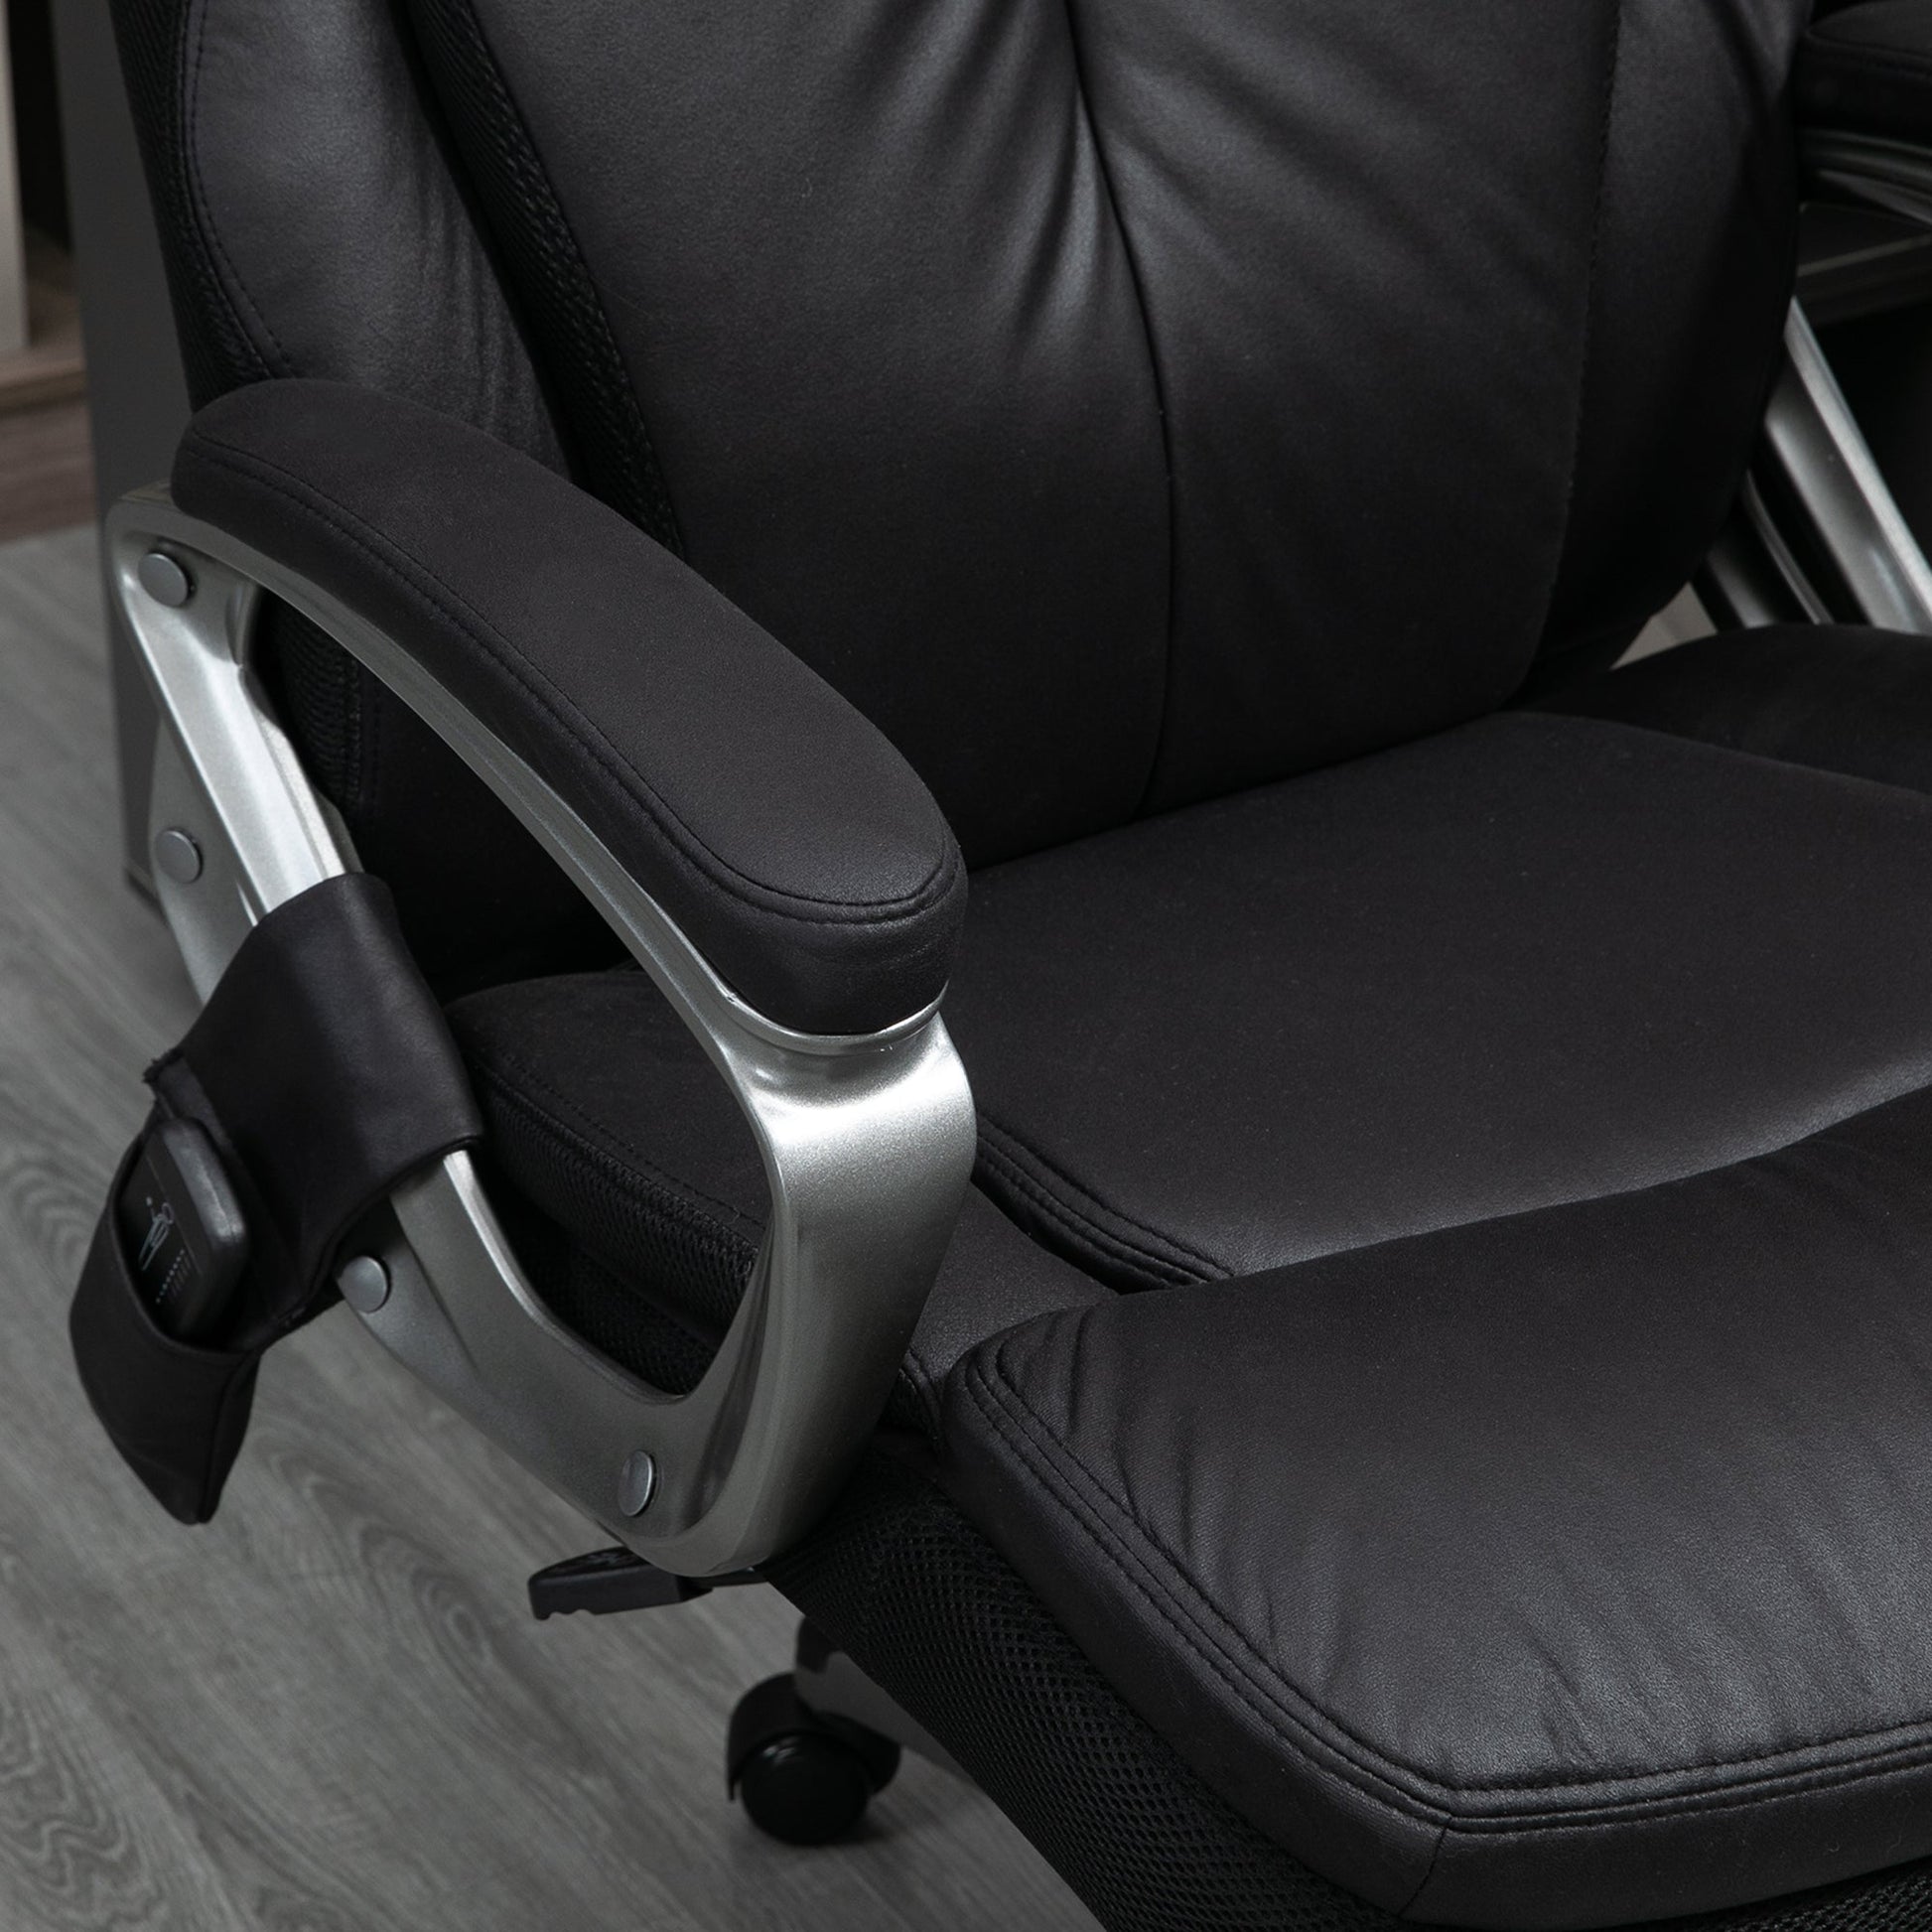 Big and Tall Massage Office Chair with Strong Vibration, Microfiber Office Chair, 27.25"x31.5"x48.75", Black - Gallery Canada